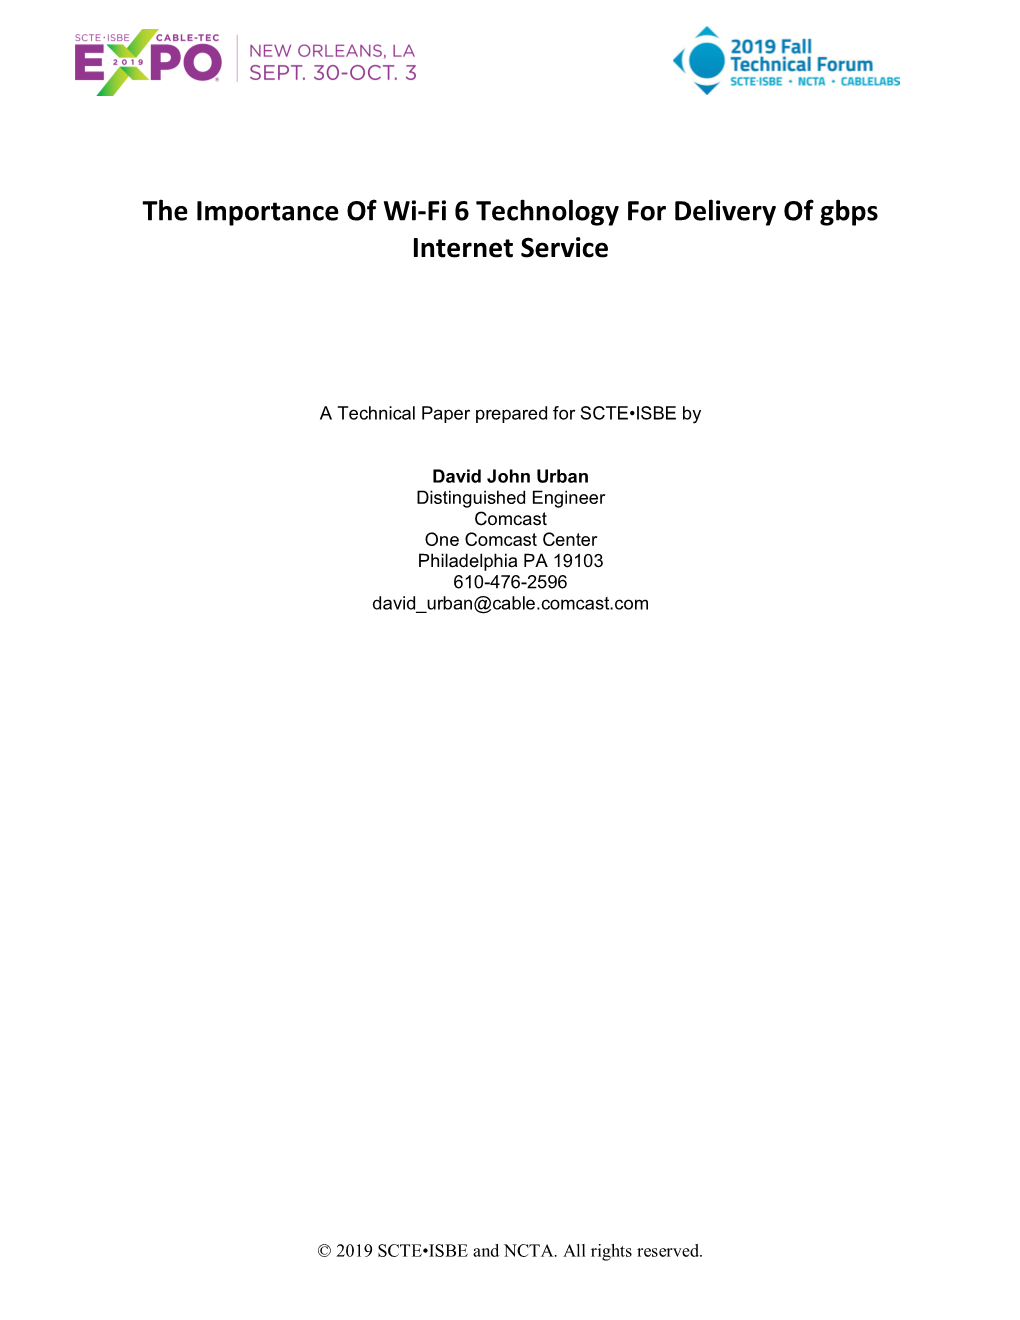 The Importance of Wi-Fi 6 Technology for Delivery of Gbps Internet Service